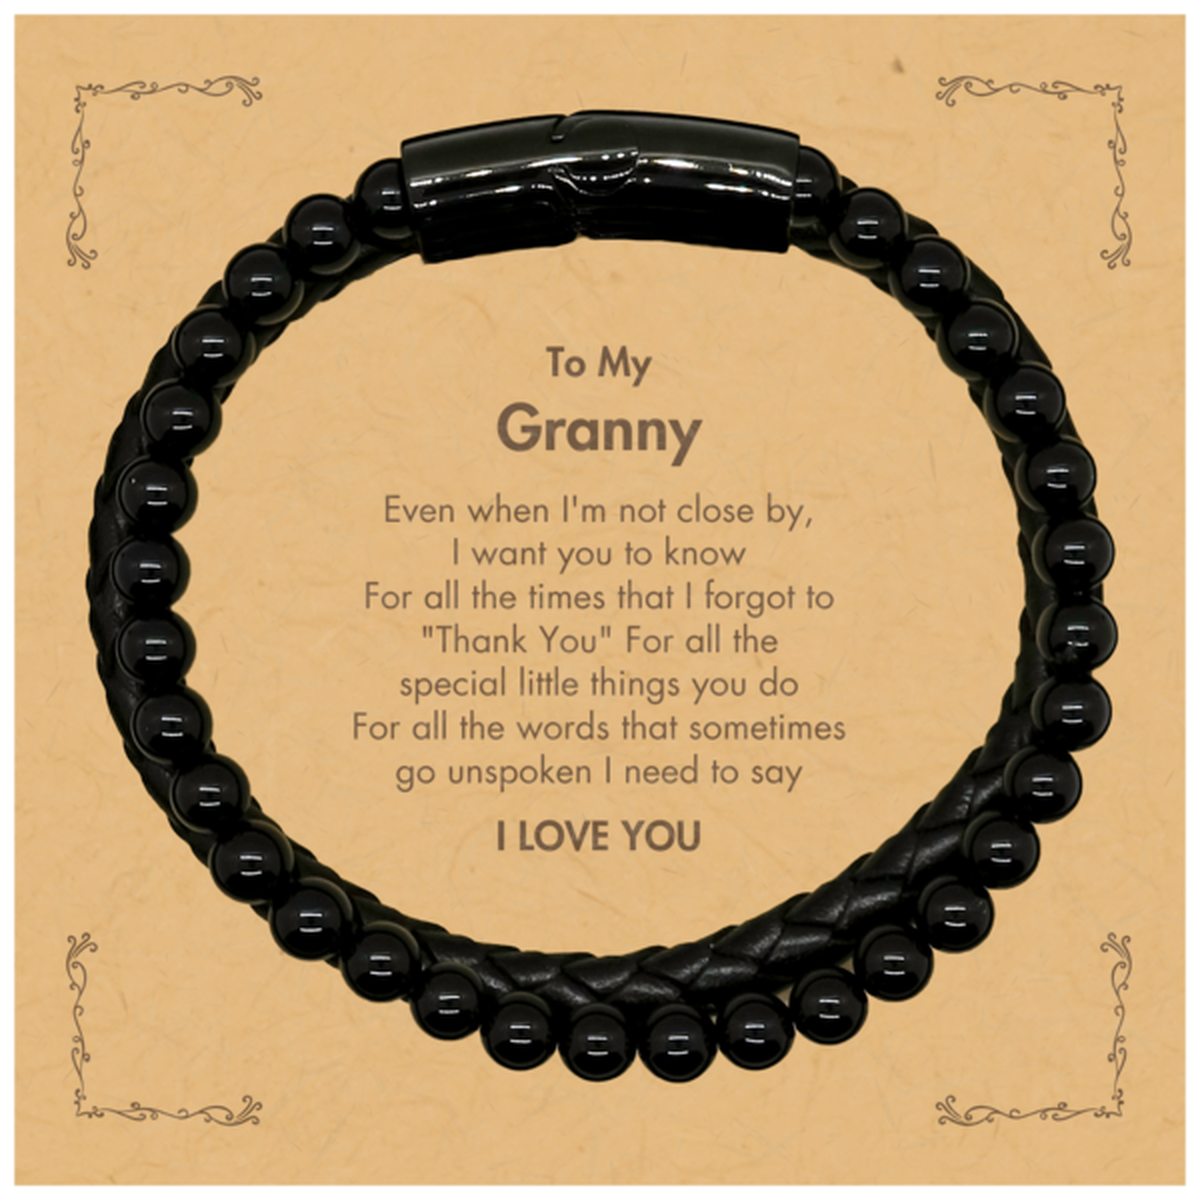 Thank You Gifts for Granny, Keepsake Stone Leather Bracelets Gifts for Granny Birthday Mother's day Father's Day Granny For all the words That sometimes go unspoken I need to say I LOVE YOU